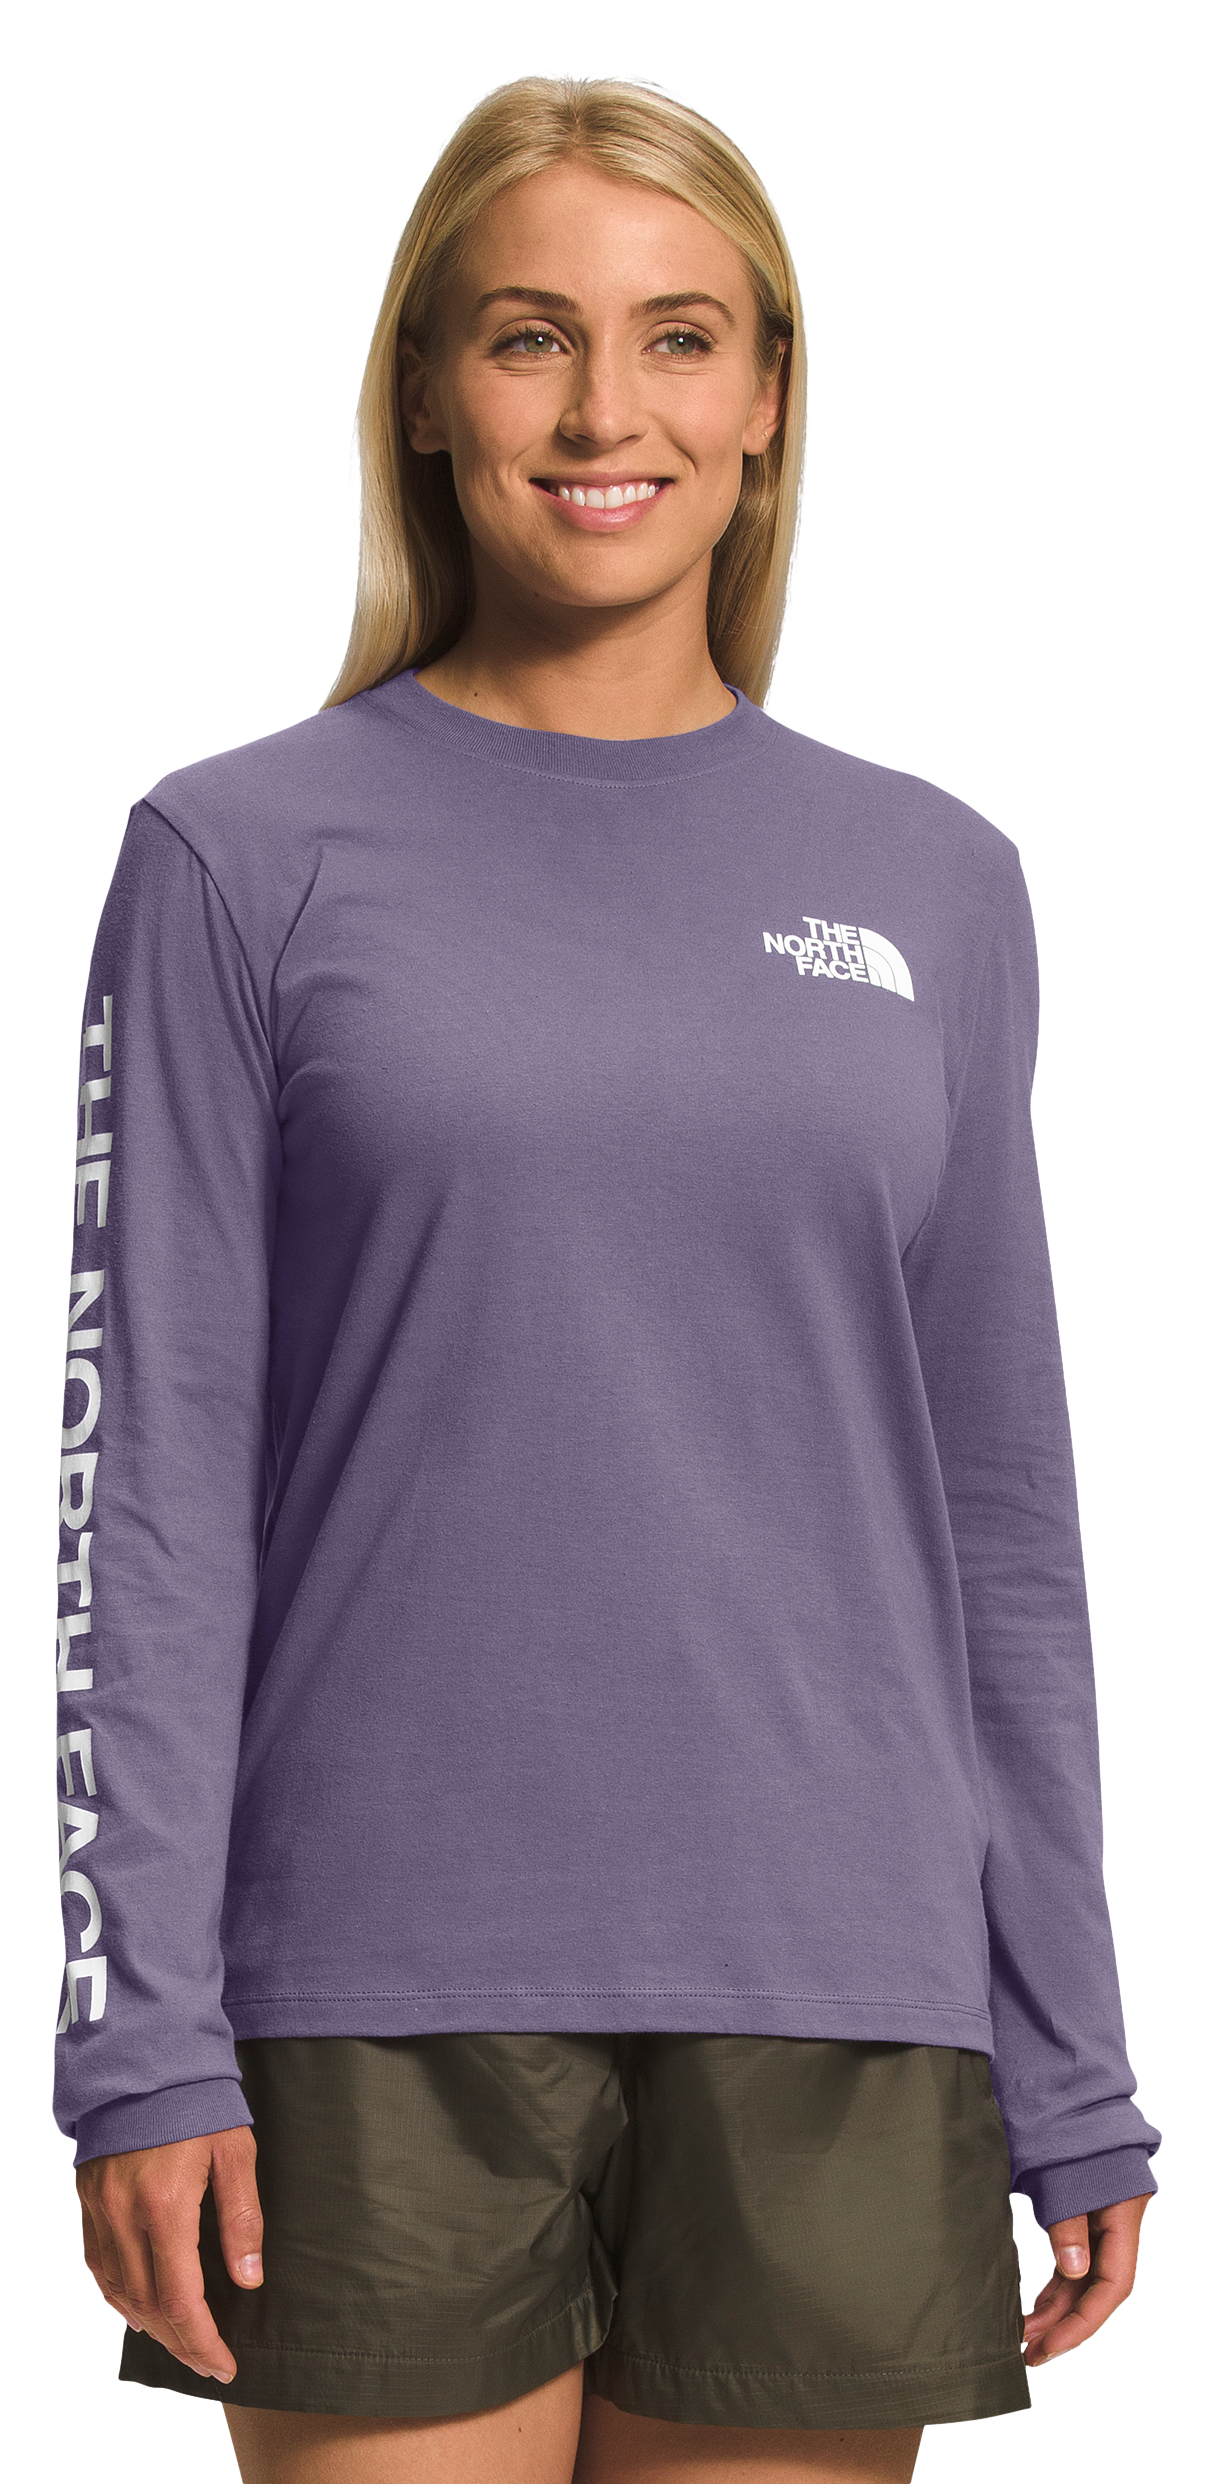 The North Face Hit Graphic Long-Sleeve T-Shirt for Ladies - Lunar Slate/TNF White - L